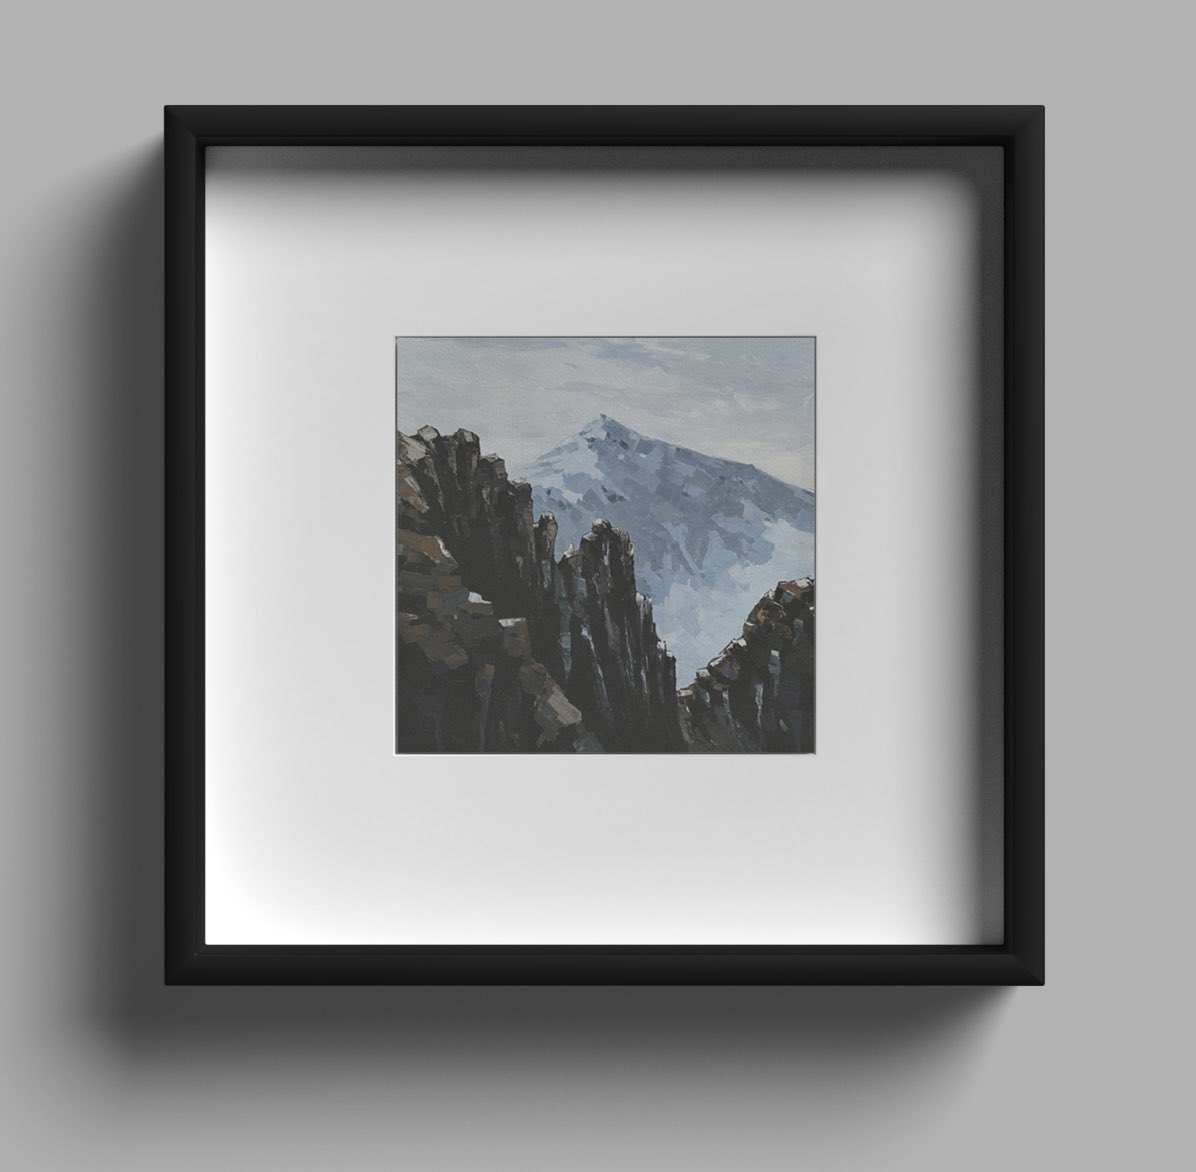 New print of “Crib Goch” limited to 10 Artists Proof and ready for Christmas. Crib Goch is a scramble and described as a “knife-edge”